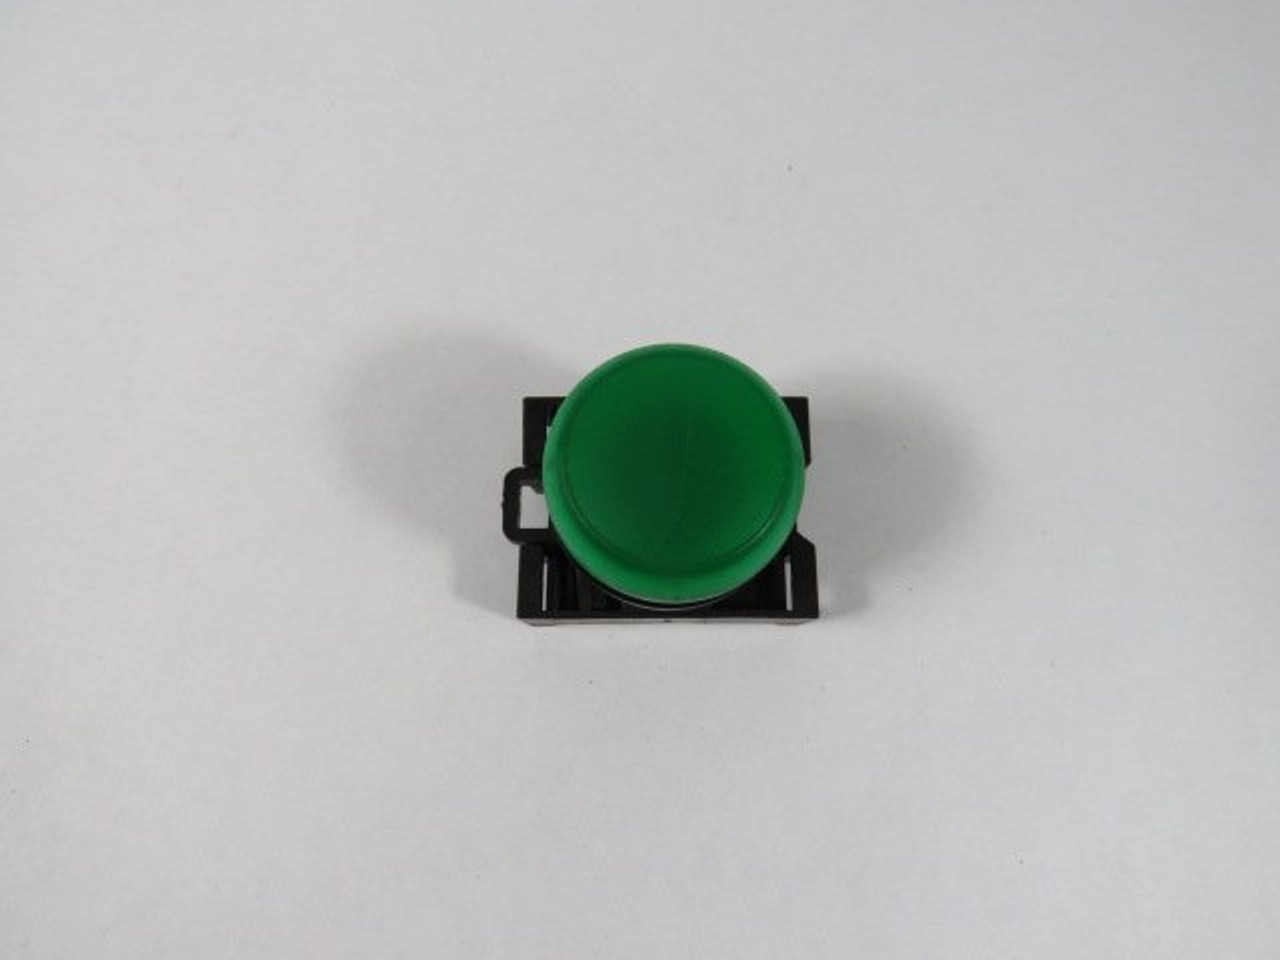 Eaton M22-L-G Green Indicating Light Operator w/ Mounting Latch USED